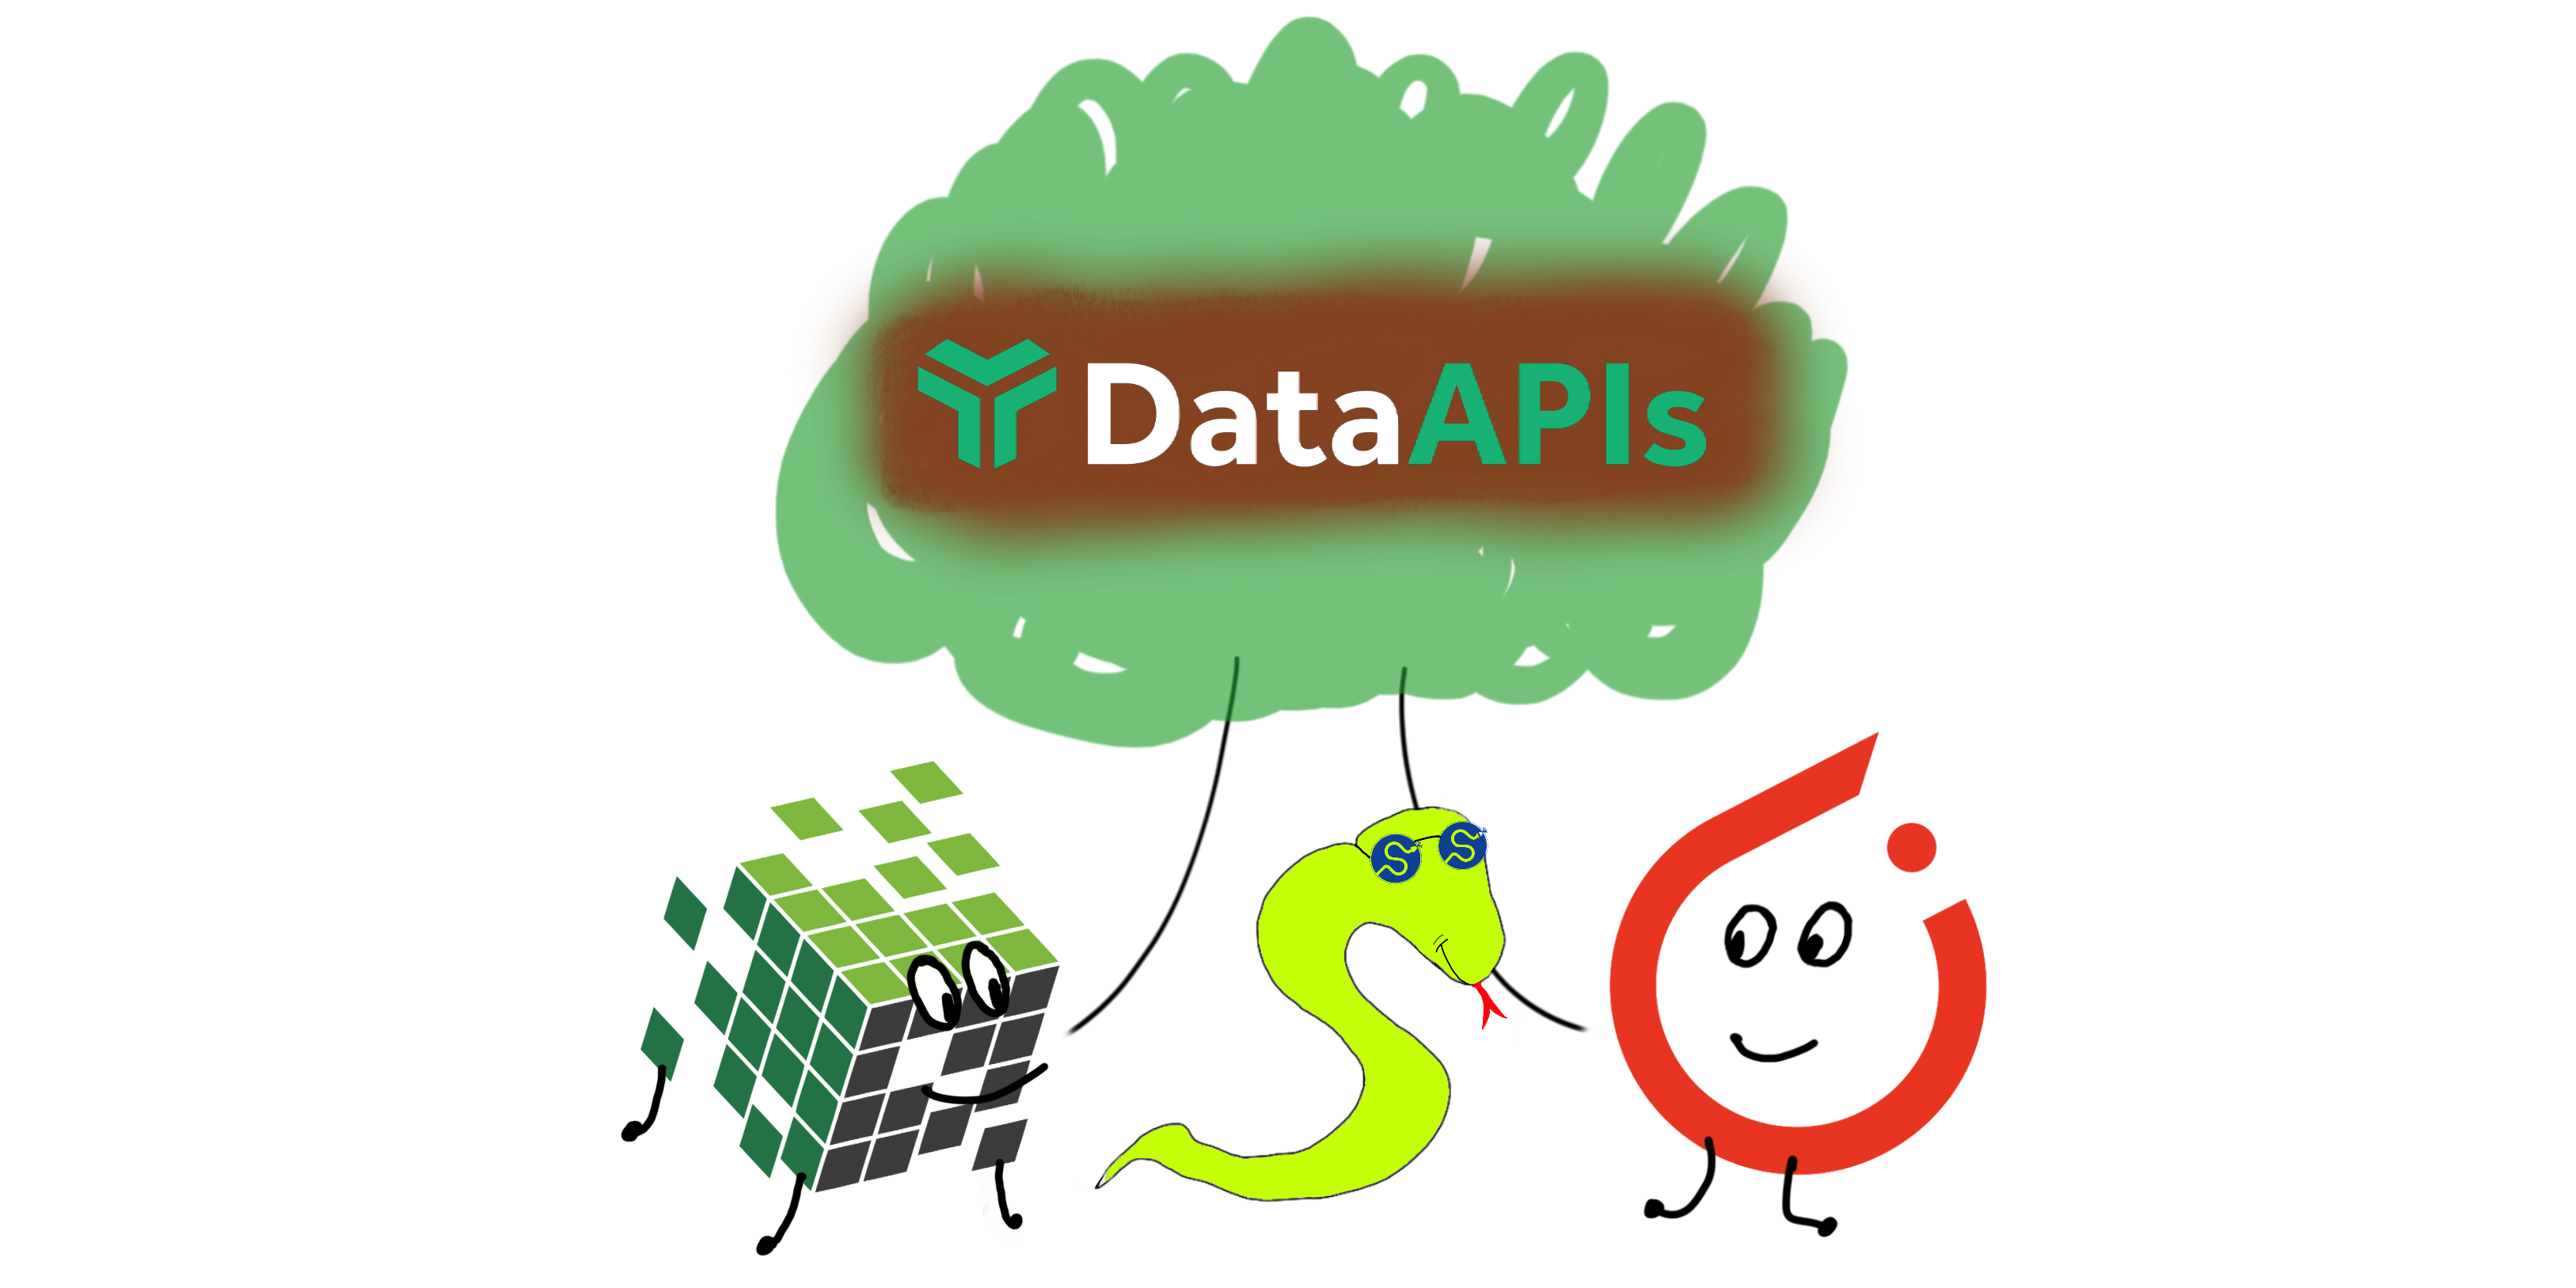 An illustration of three cartoon characters - CuPy Cube, SciPy Snake and PyTorch Flame - together (happily!) under a tree with green leaves bearing the Consortium for Python Data API Standards logo ("DataAPIs") on a brown background. CuPy Cube and PyTorch Flame are made up of the CuPy and PyTorch logos respectively, with smiley faces and stick legs. SciPy Snake is a green snake with a red tongue, wearing sunglasses with SciPy logos for lenses.